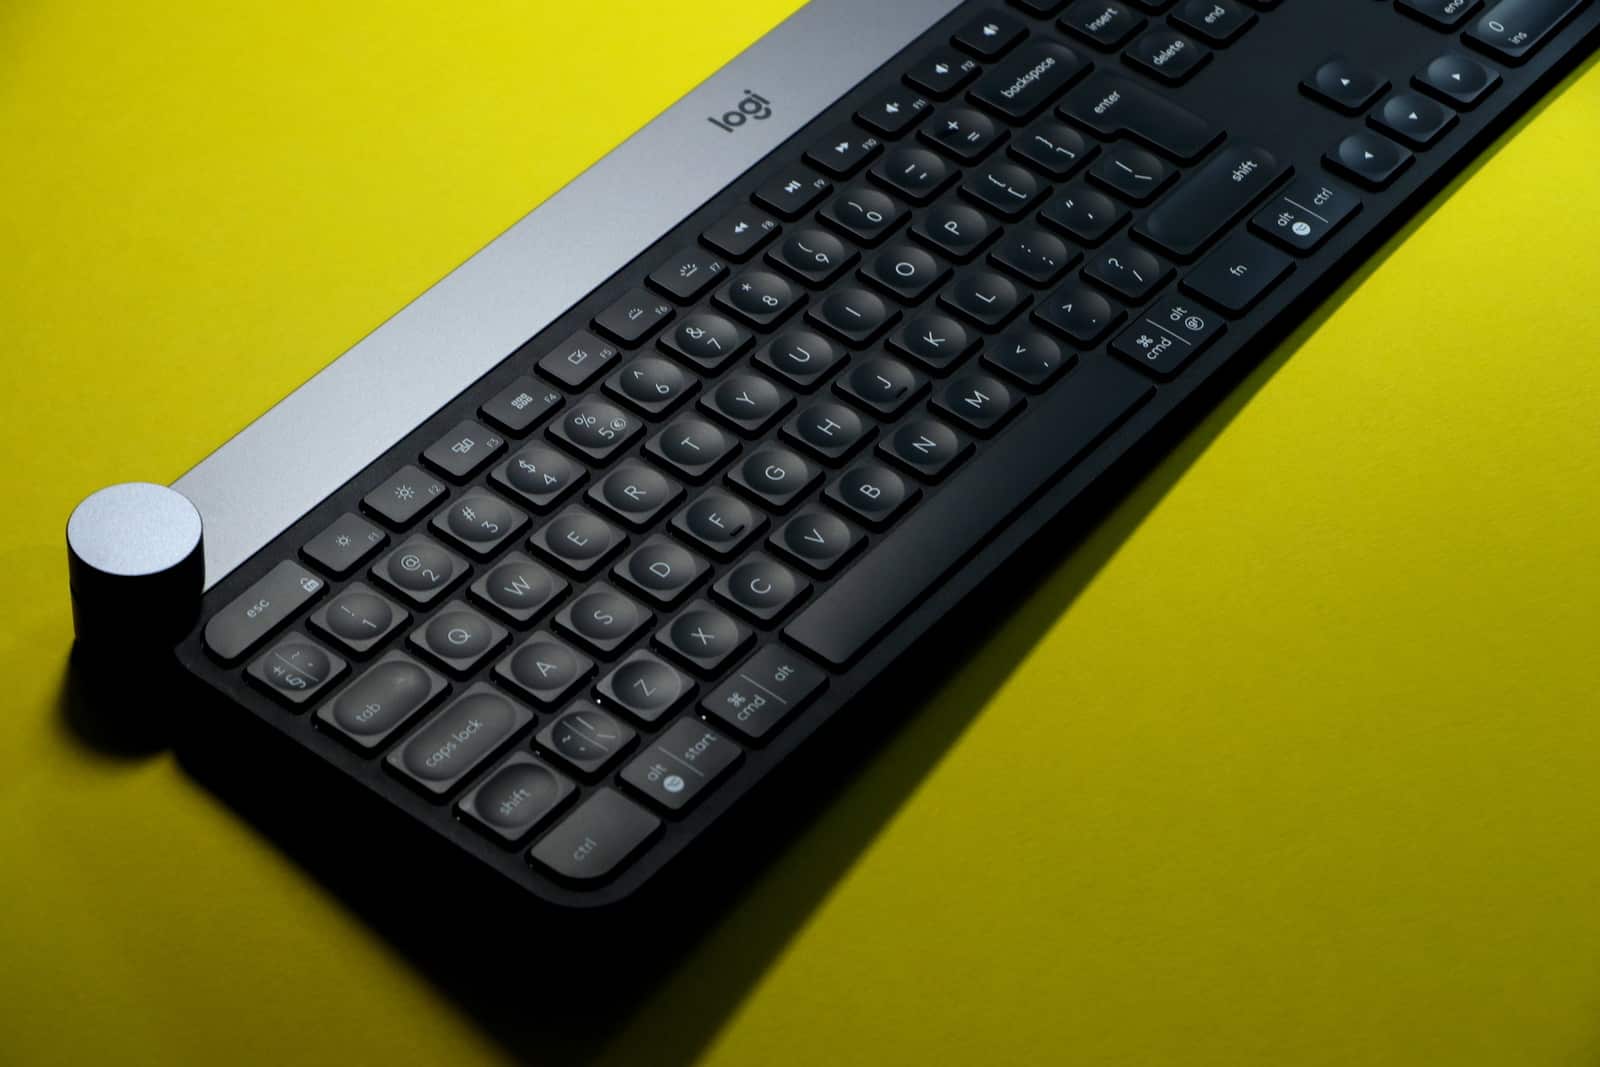 Logitech craft review crowning the queen of keyboards